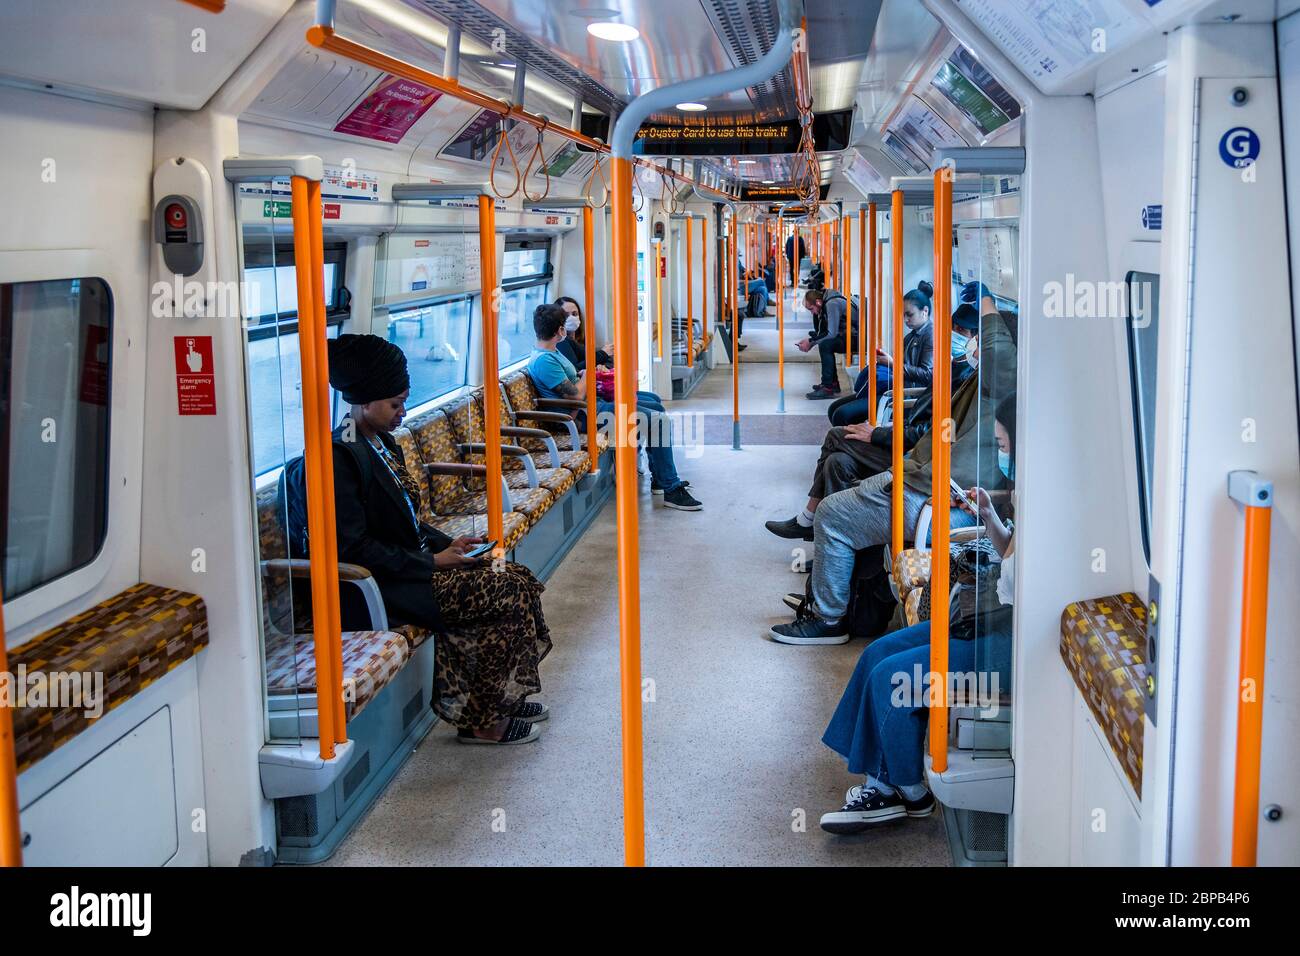 London, UK. 18th May, 2020. The overground has a few pasengers with plenty of space for social distancing, few wear masks - One way systems and extra staff to guide peopel, but the trains are largely empty, even at rush hour. The eased 'lockdown' continues for the Coronavirus (Covid 19) outbreak in London. Credit: Guy Bell/Alamy Live News Stock Photo